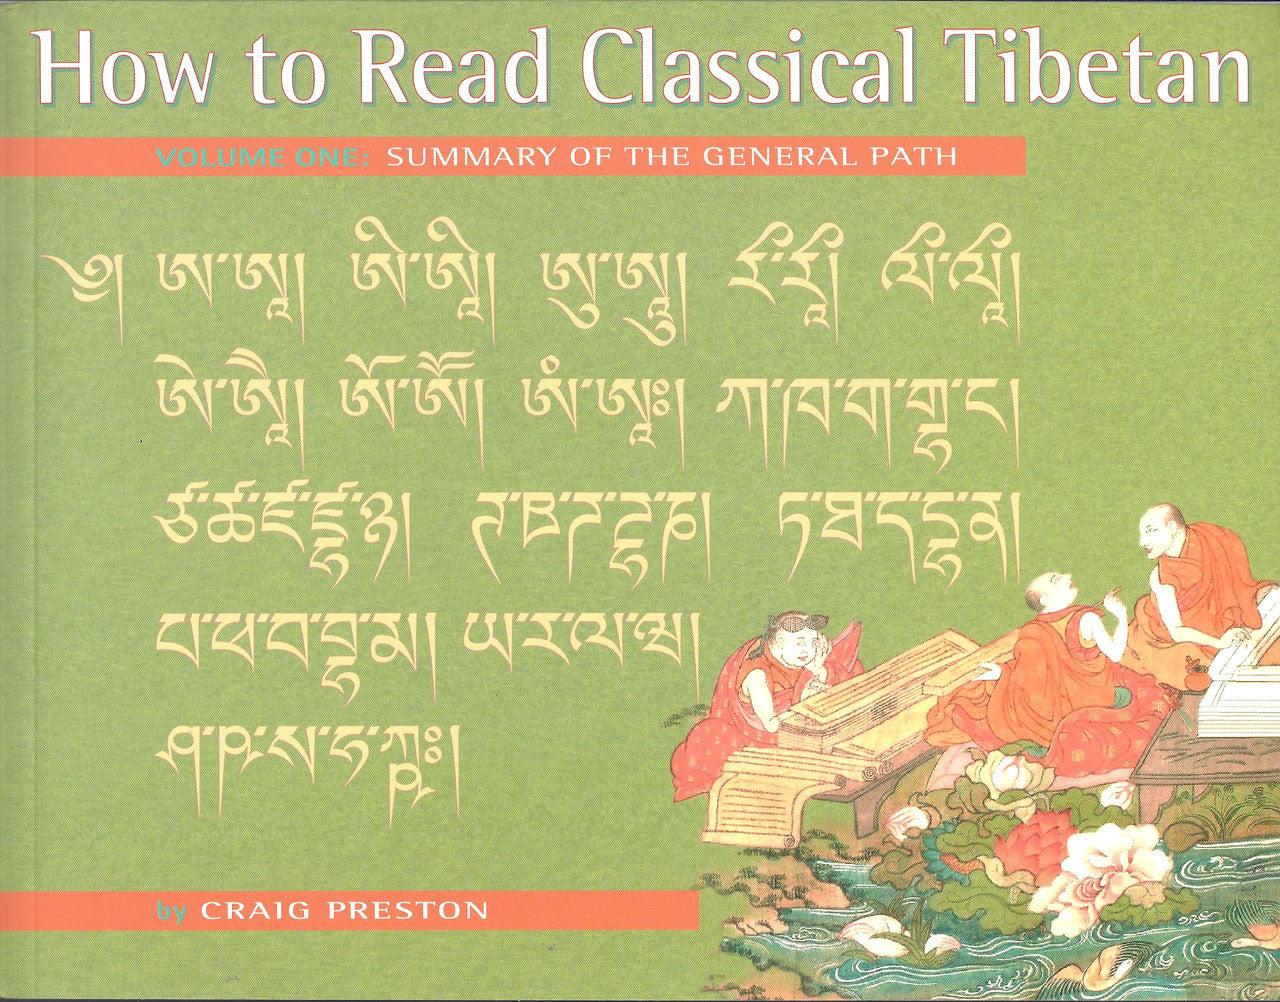 How to Read Classical Tibetan Volume One: Summary of the General Path by Craig Preston